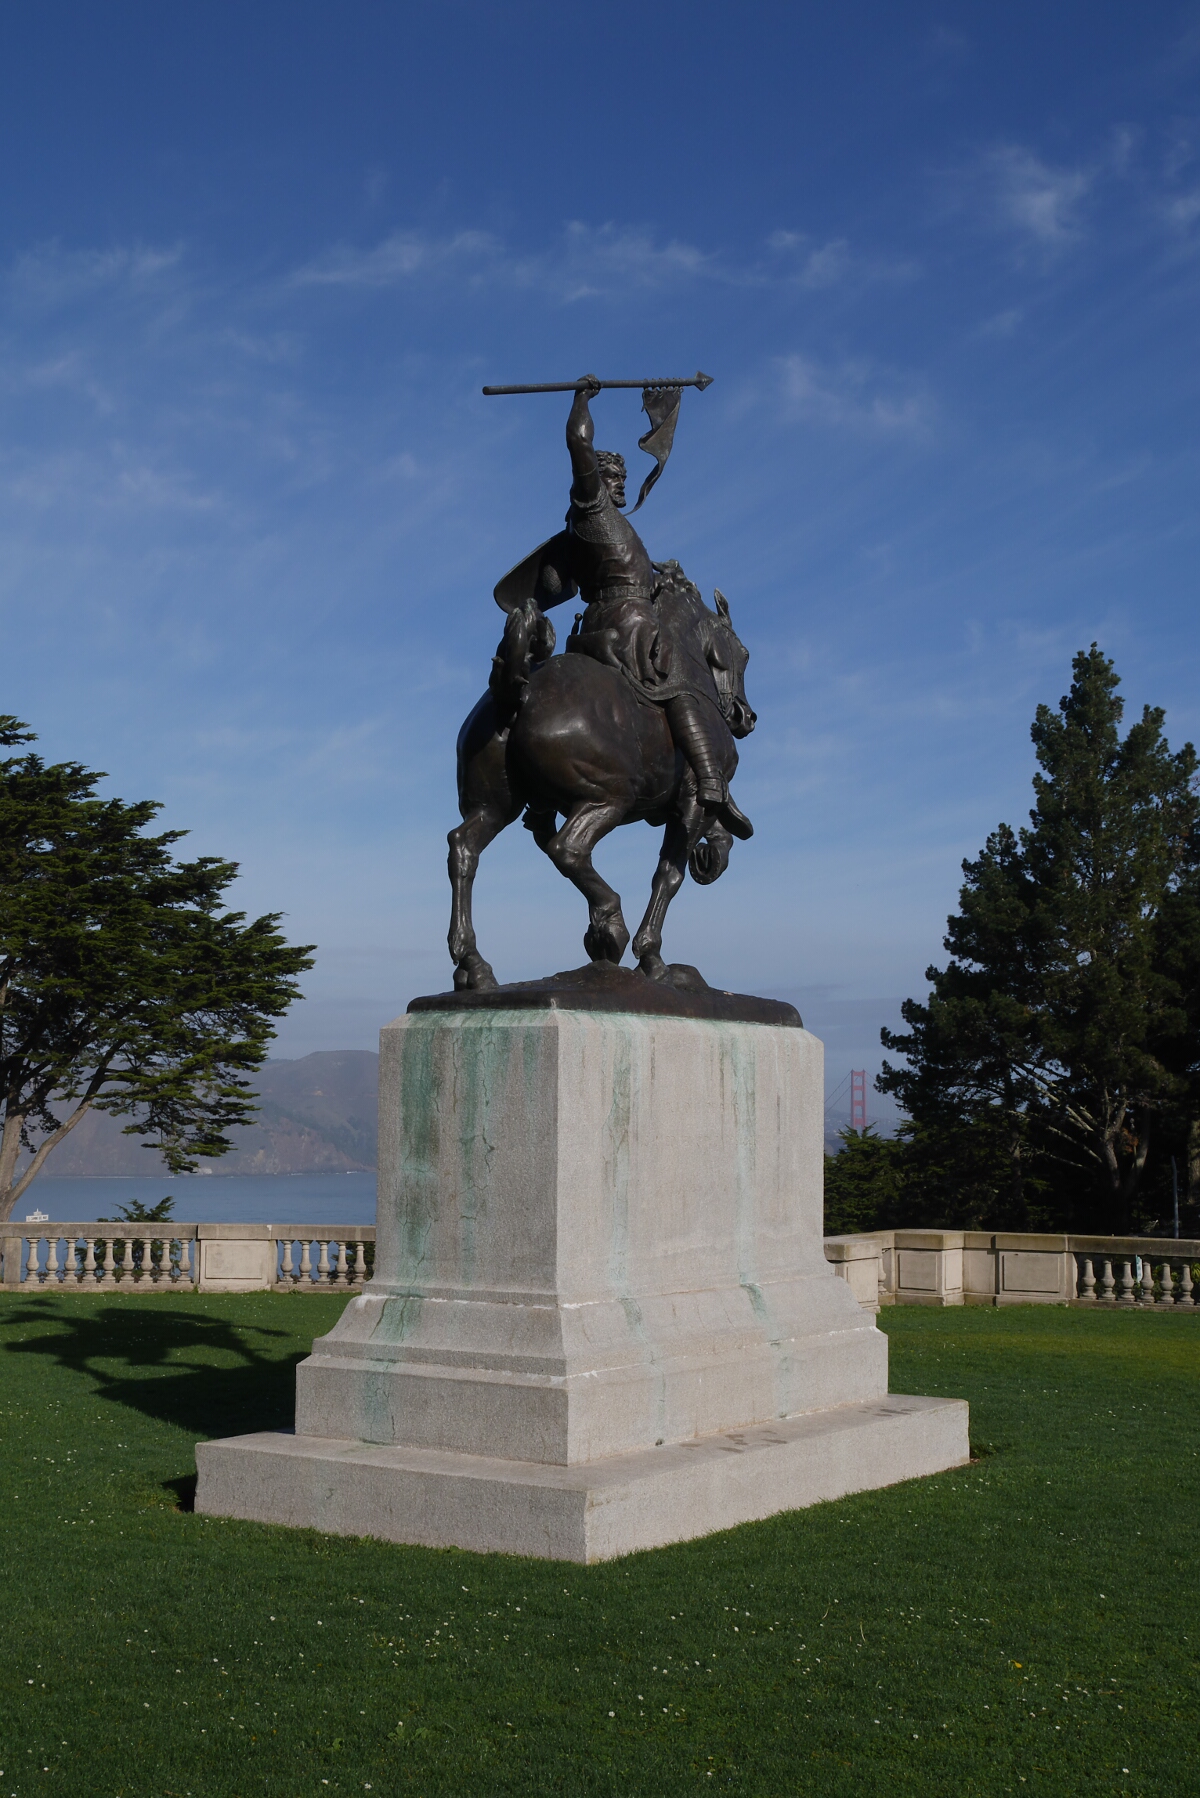 El Cid could see the Golden Gate Bridge if he would just turn his head.